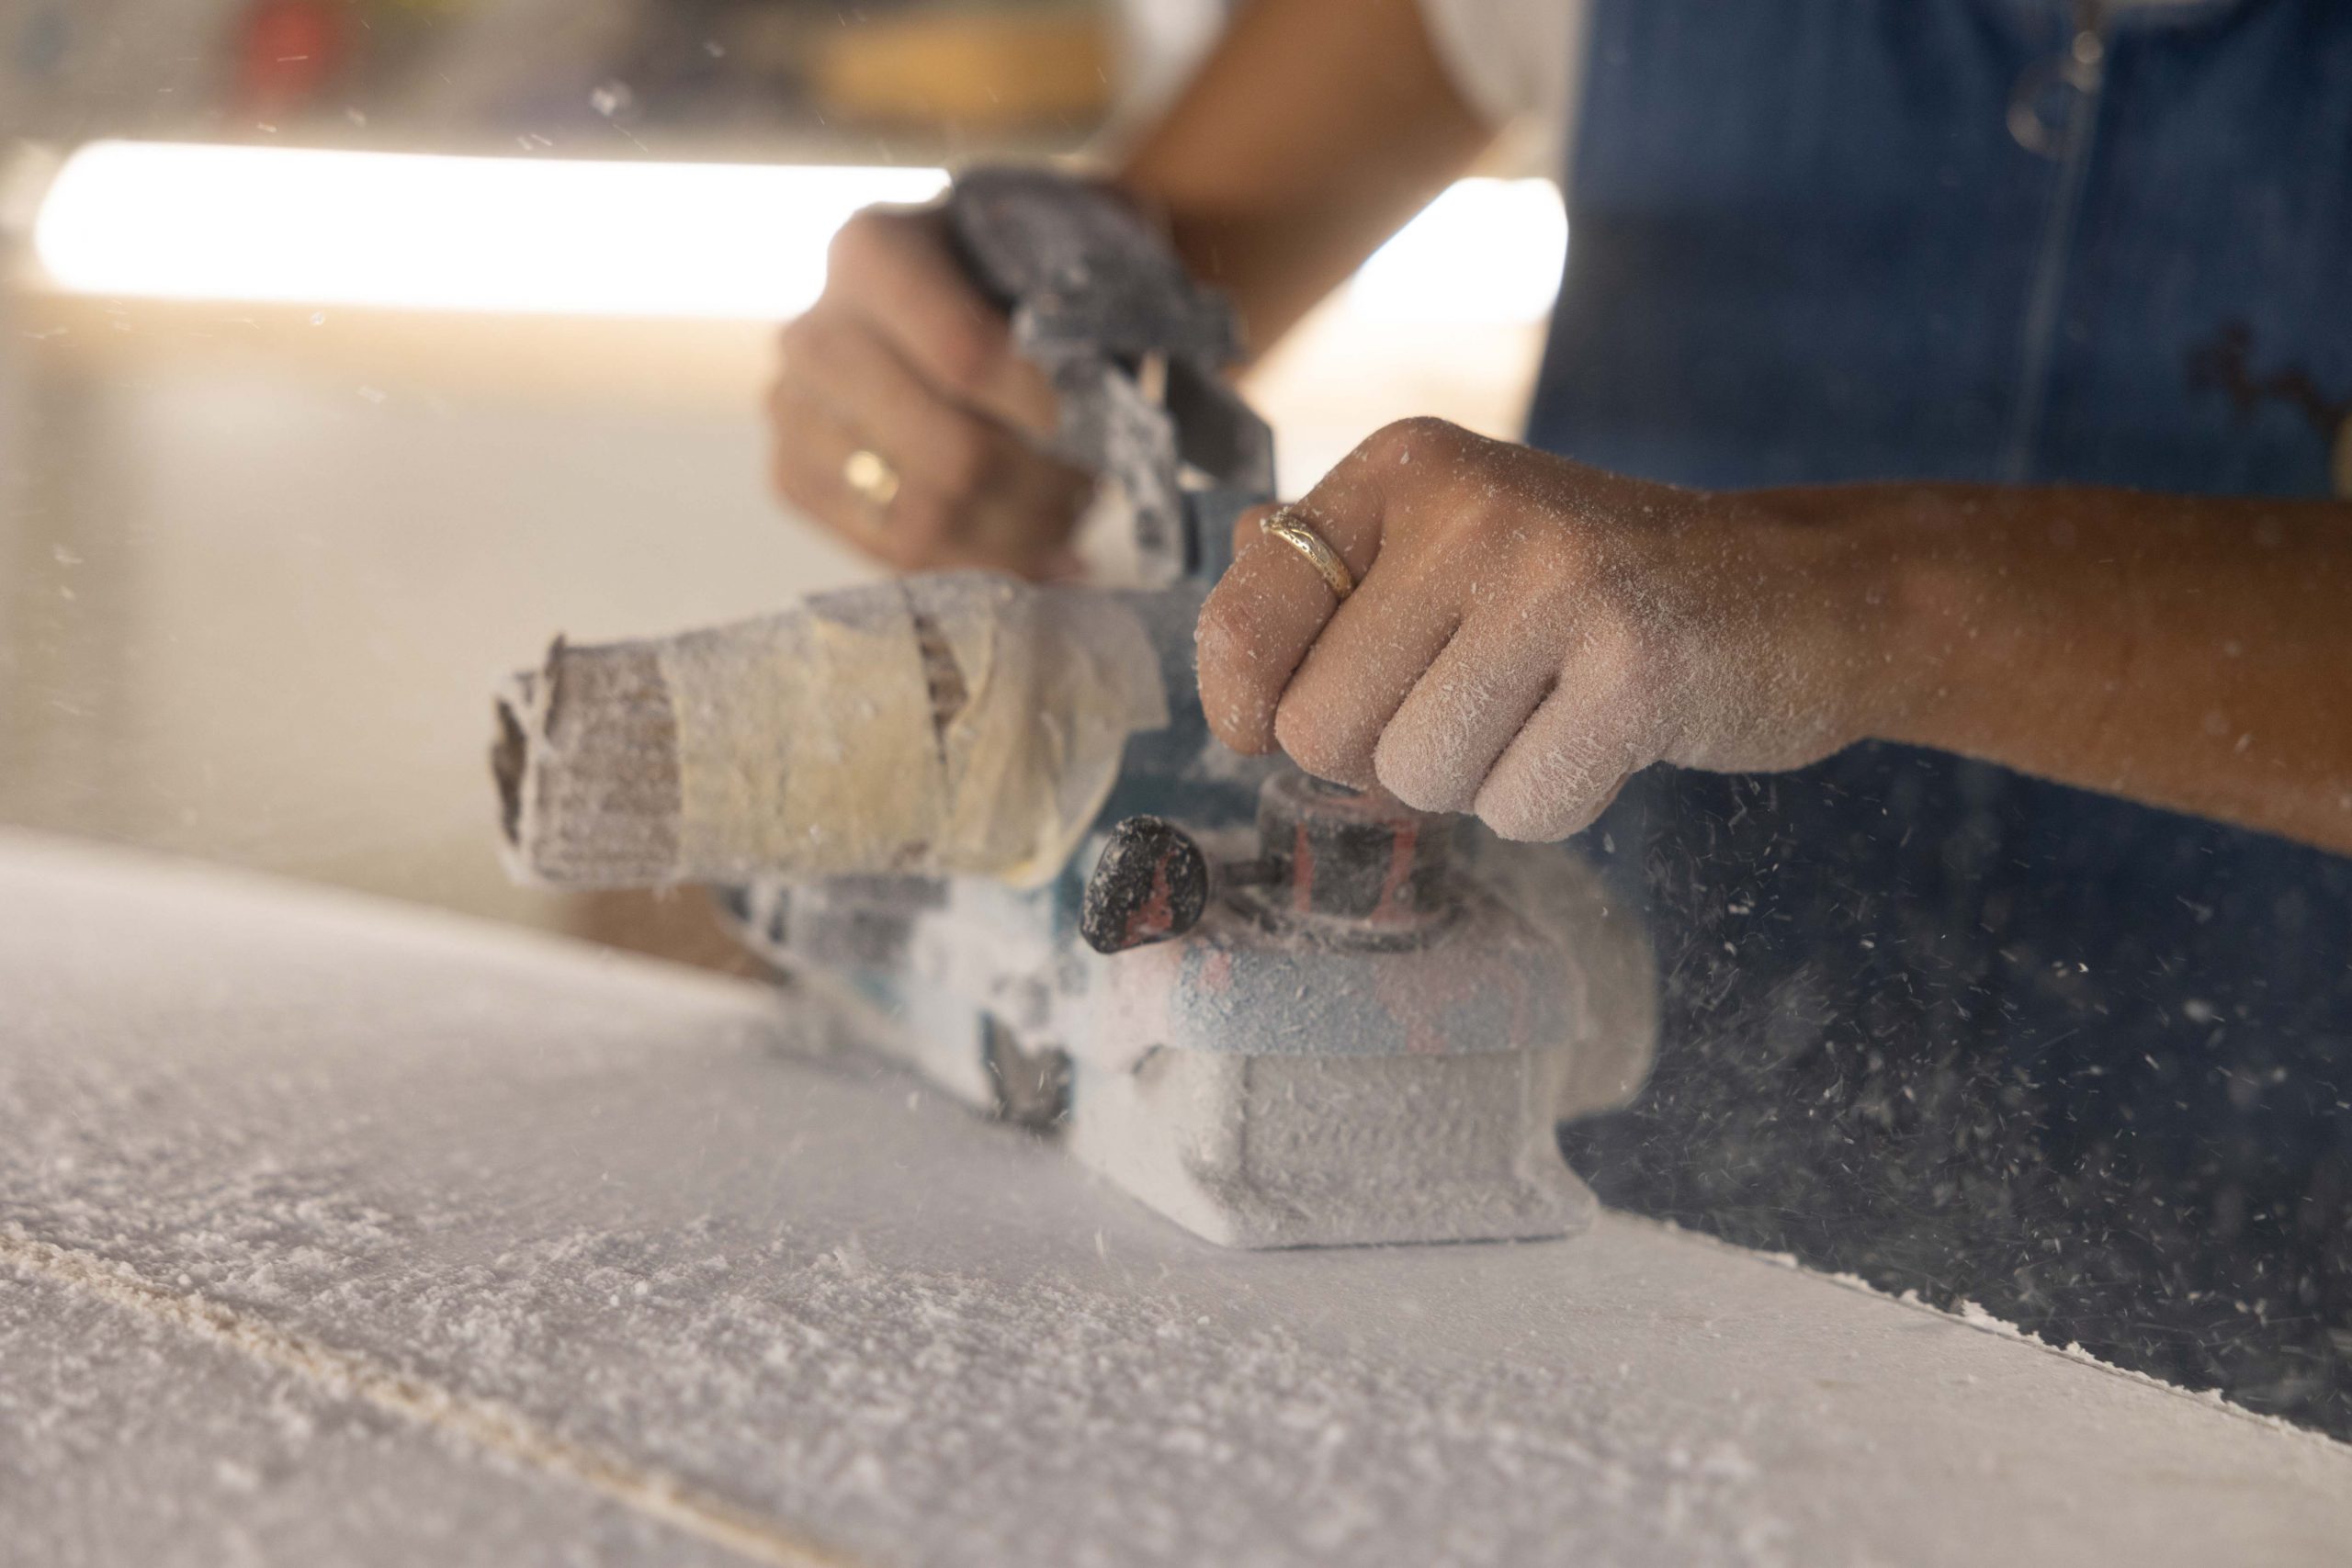 Catherine Girard uses an electric sander to shape a surfboard